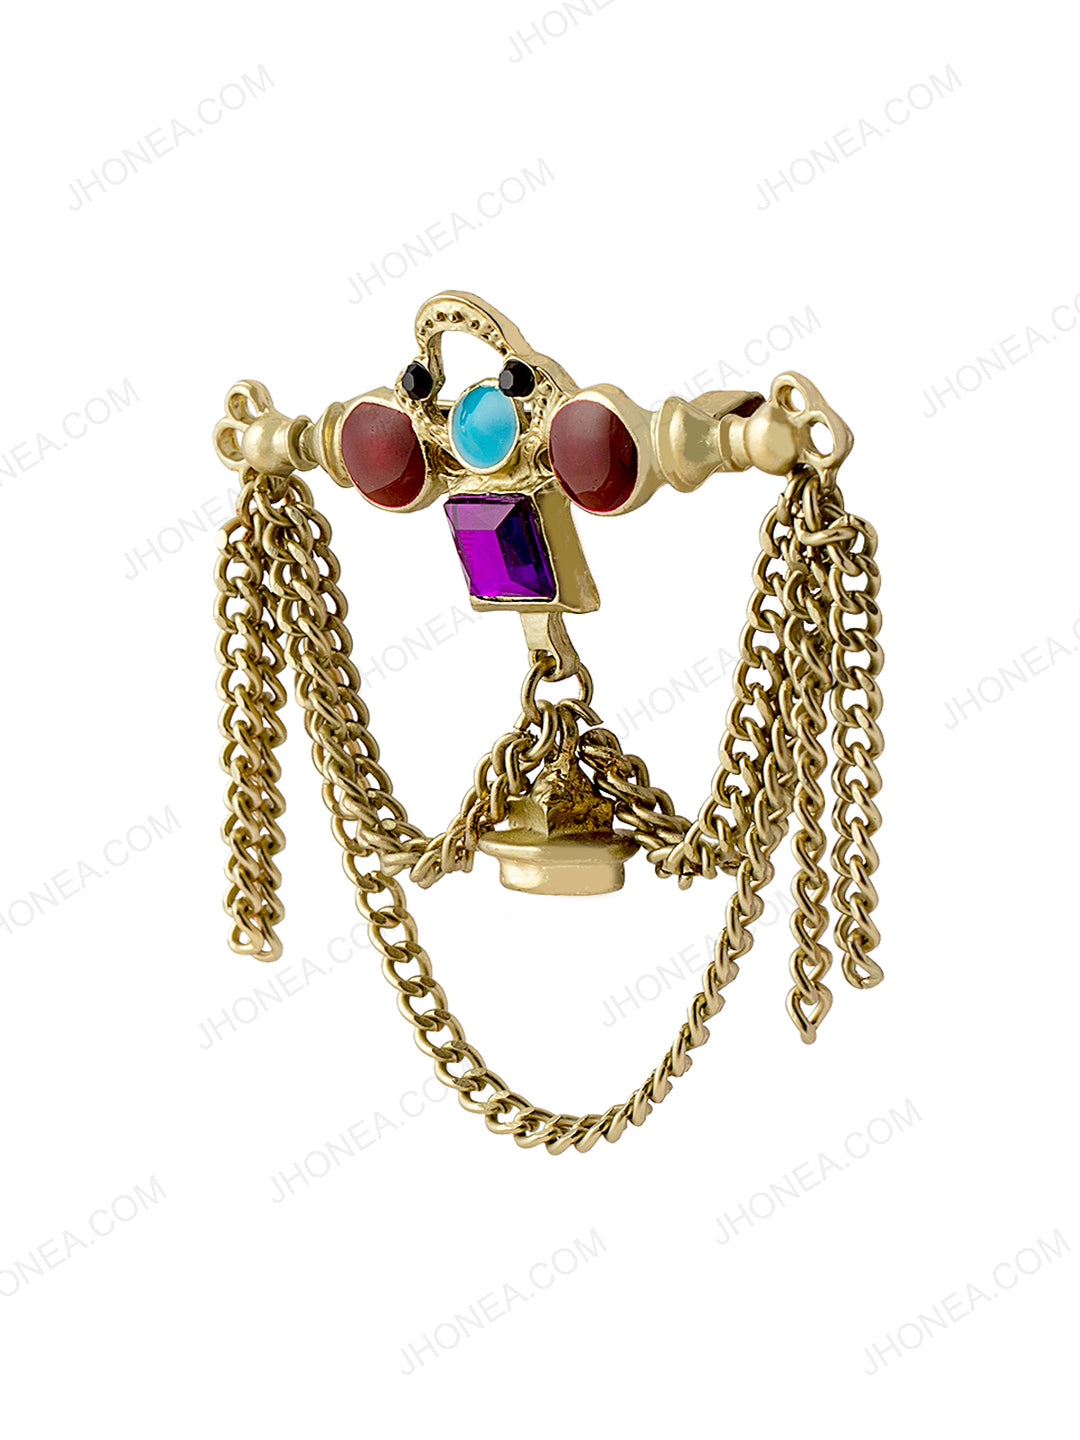 Classic Vintage Beads & Chain Hanging Brooch